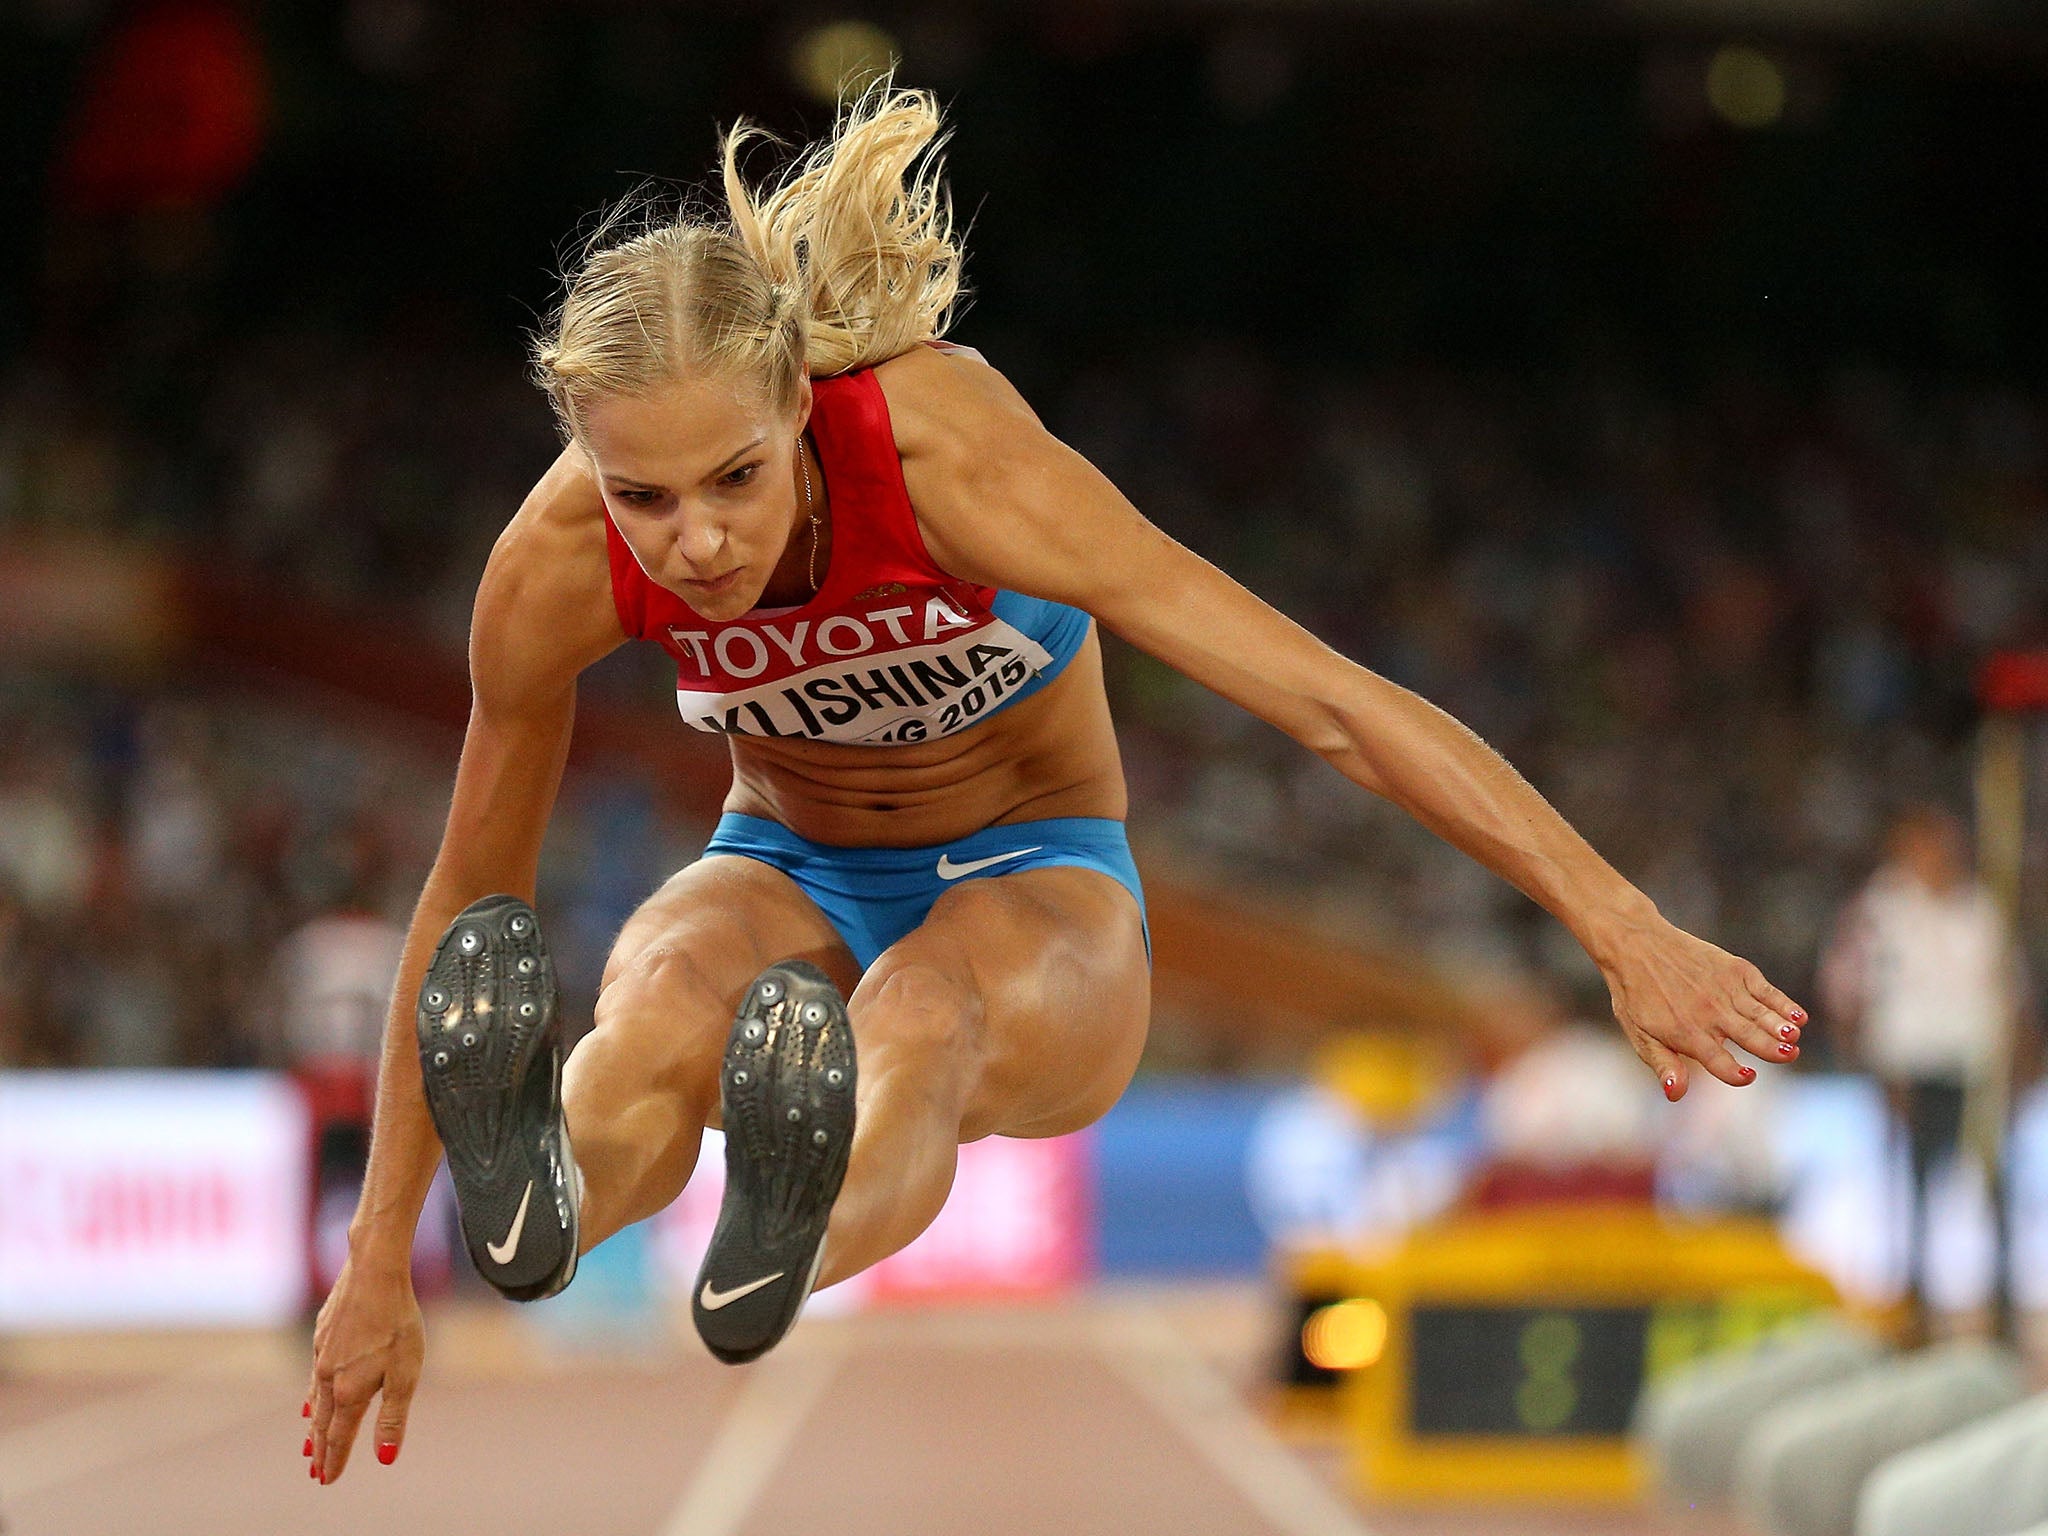 Long jumper Darya Klishina will be the only member of the Russian athletics team allowed to take part